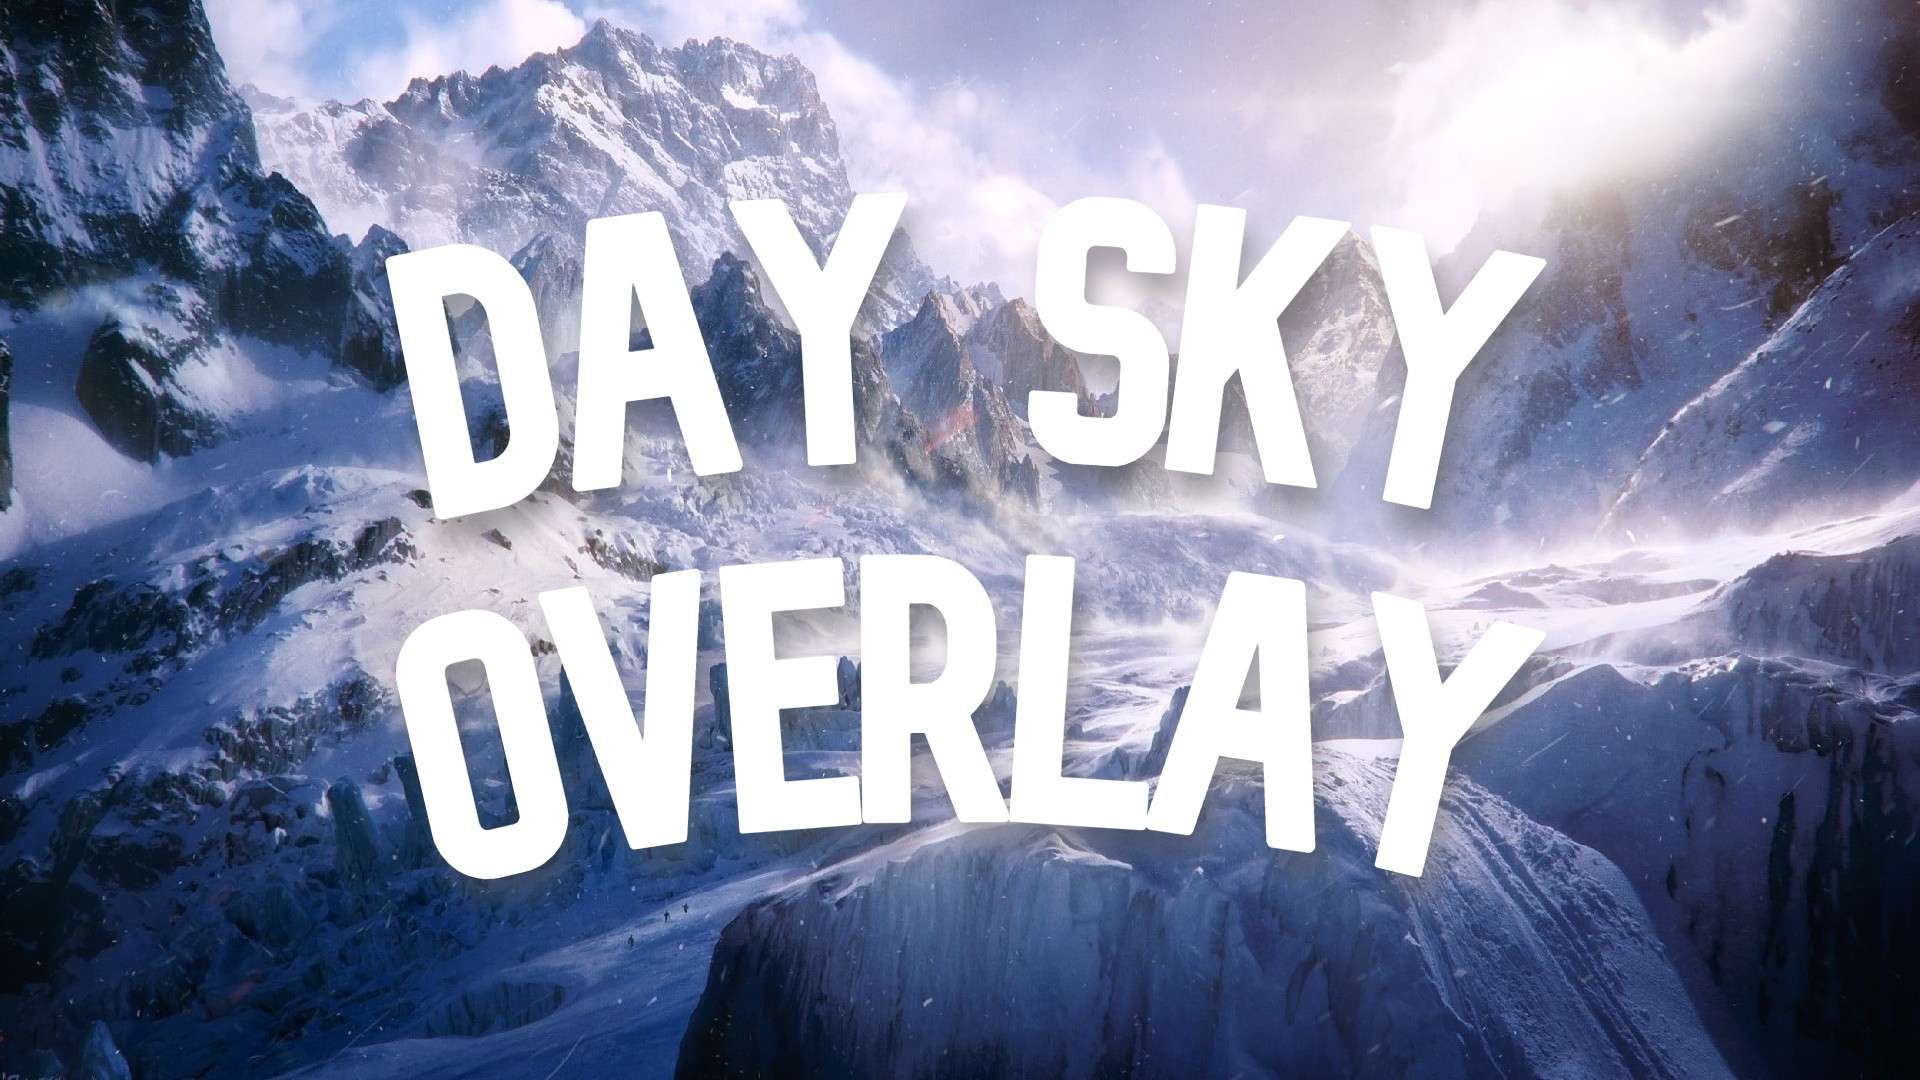 Day Sky Overlay #12 16x by rh56 on PvPRP